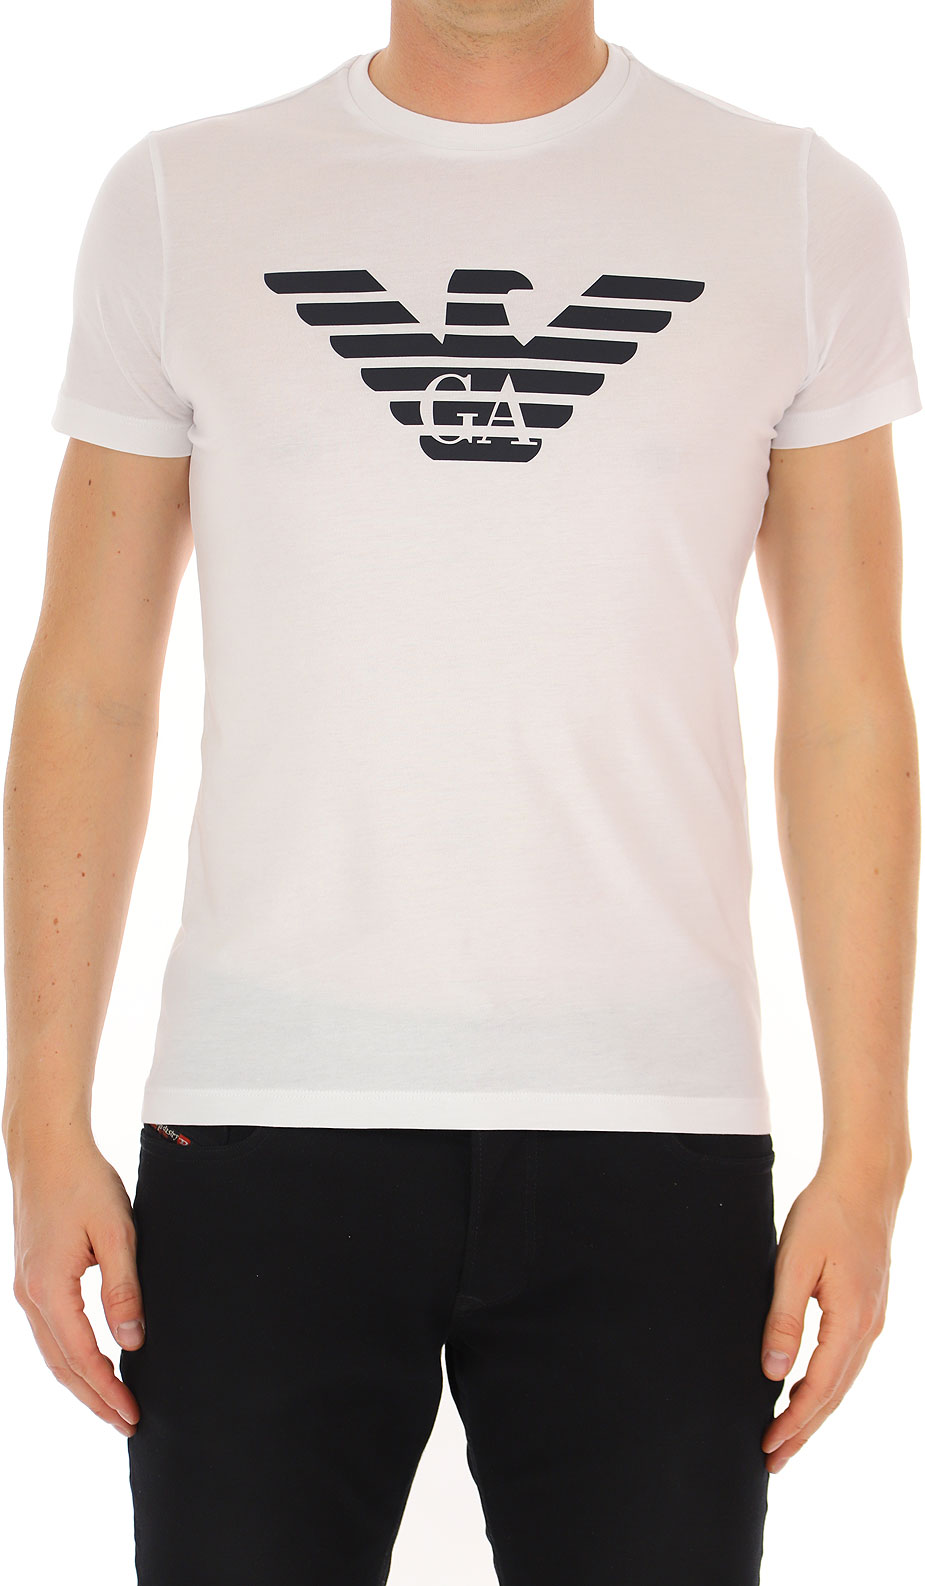 Mens Clothing Emporio Armani, Style code: 8n1t99-1jnqz-0100